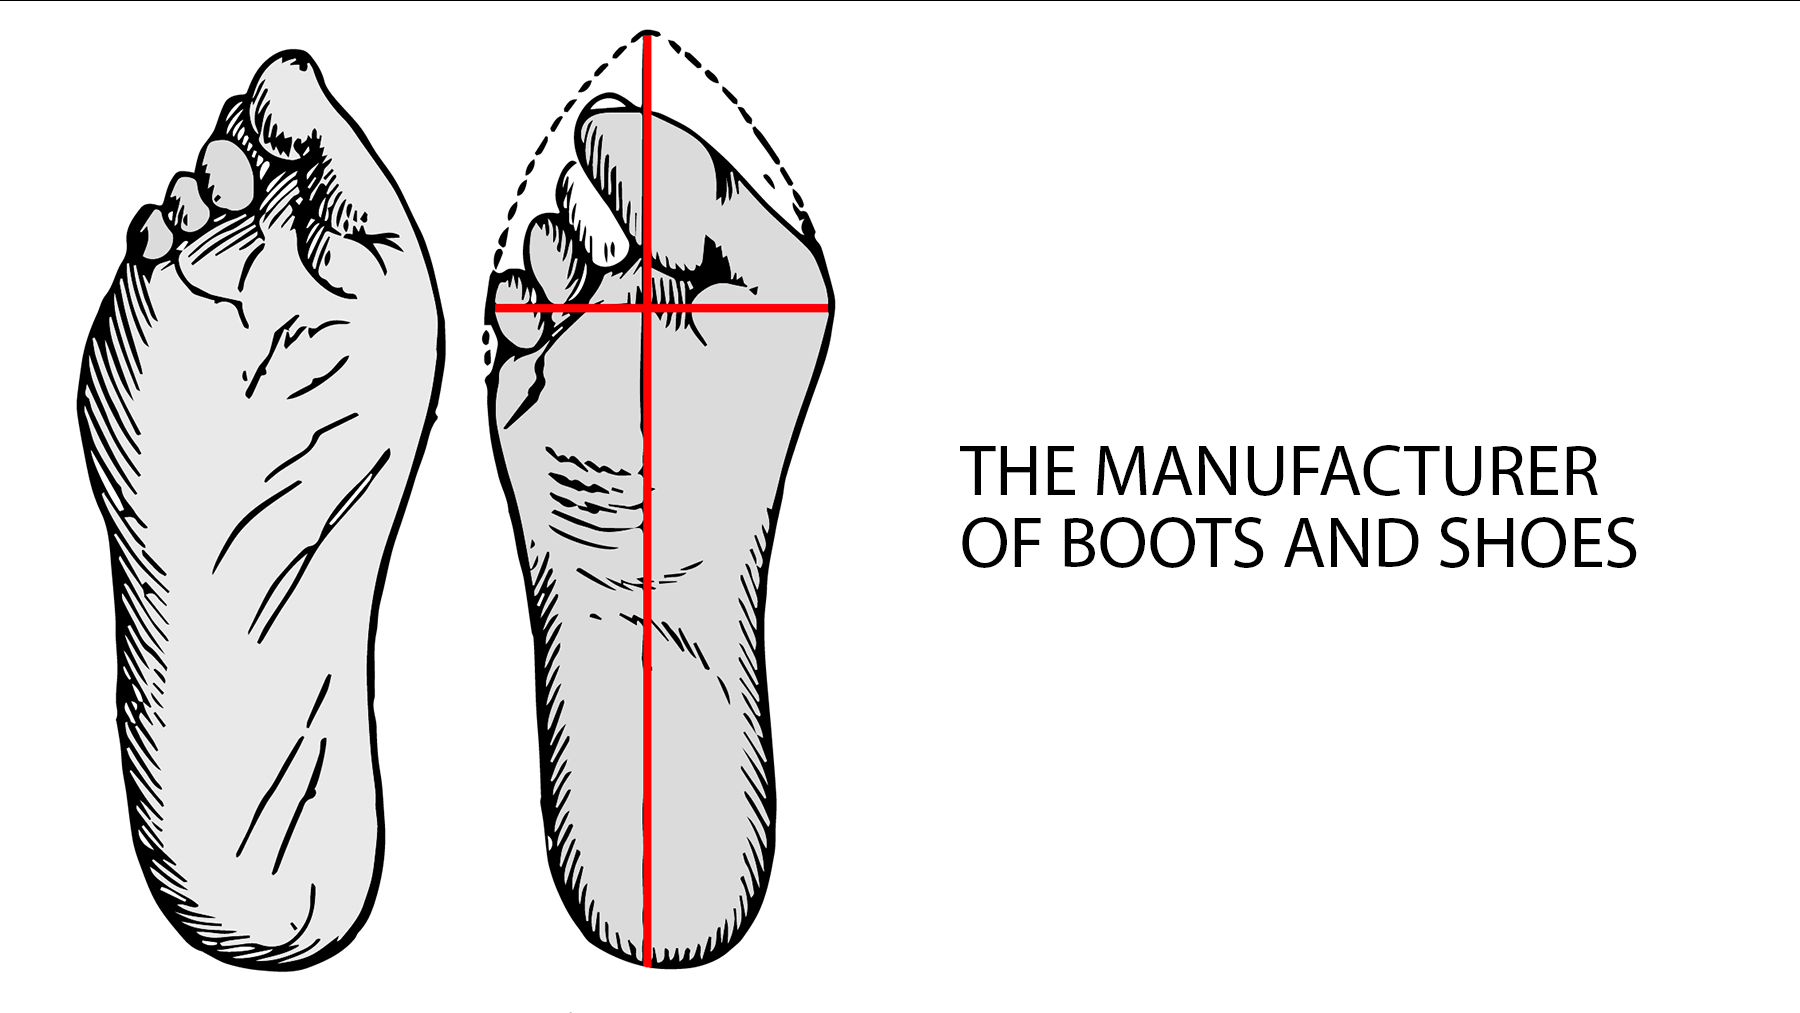 The history of shoe manufacturing.